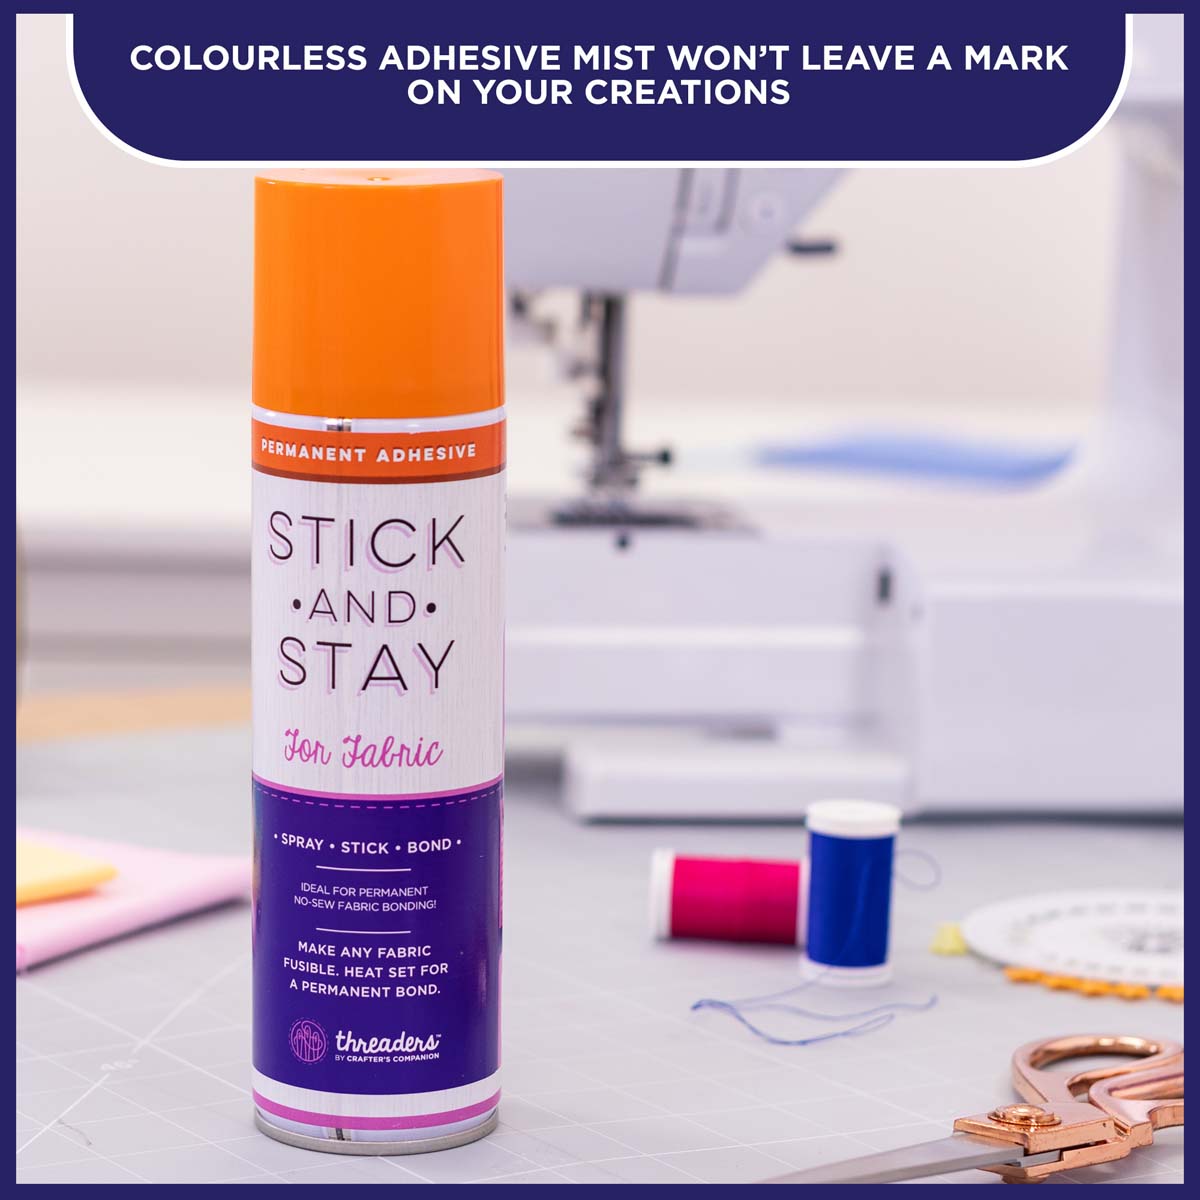 Crafter's Companion - Stick and Stay Adhesive For Fabric (ORANGE CAN)